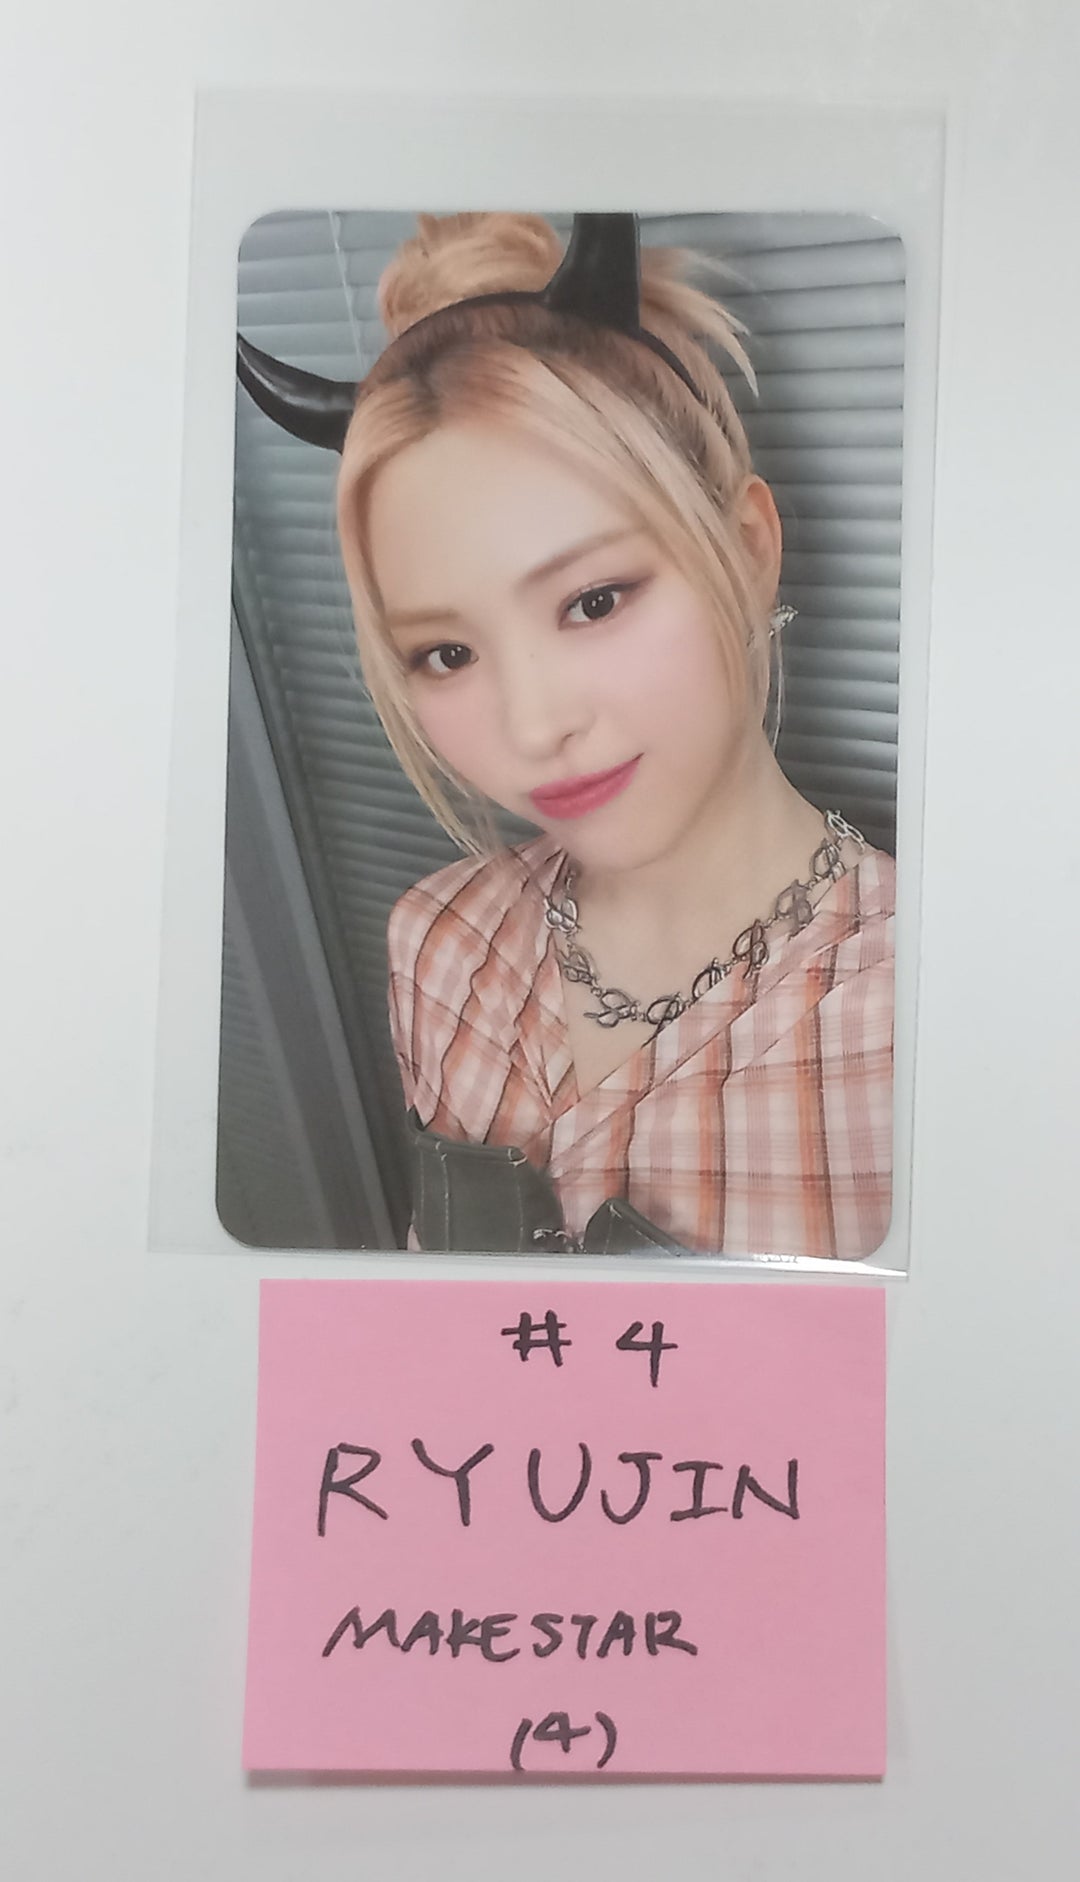 ITZY "BORN TO BE" - Makestar Fansign Event Photocard Round 2 [24.2.21]